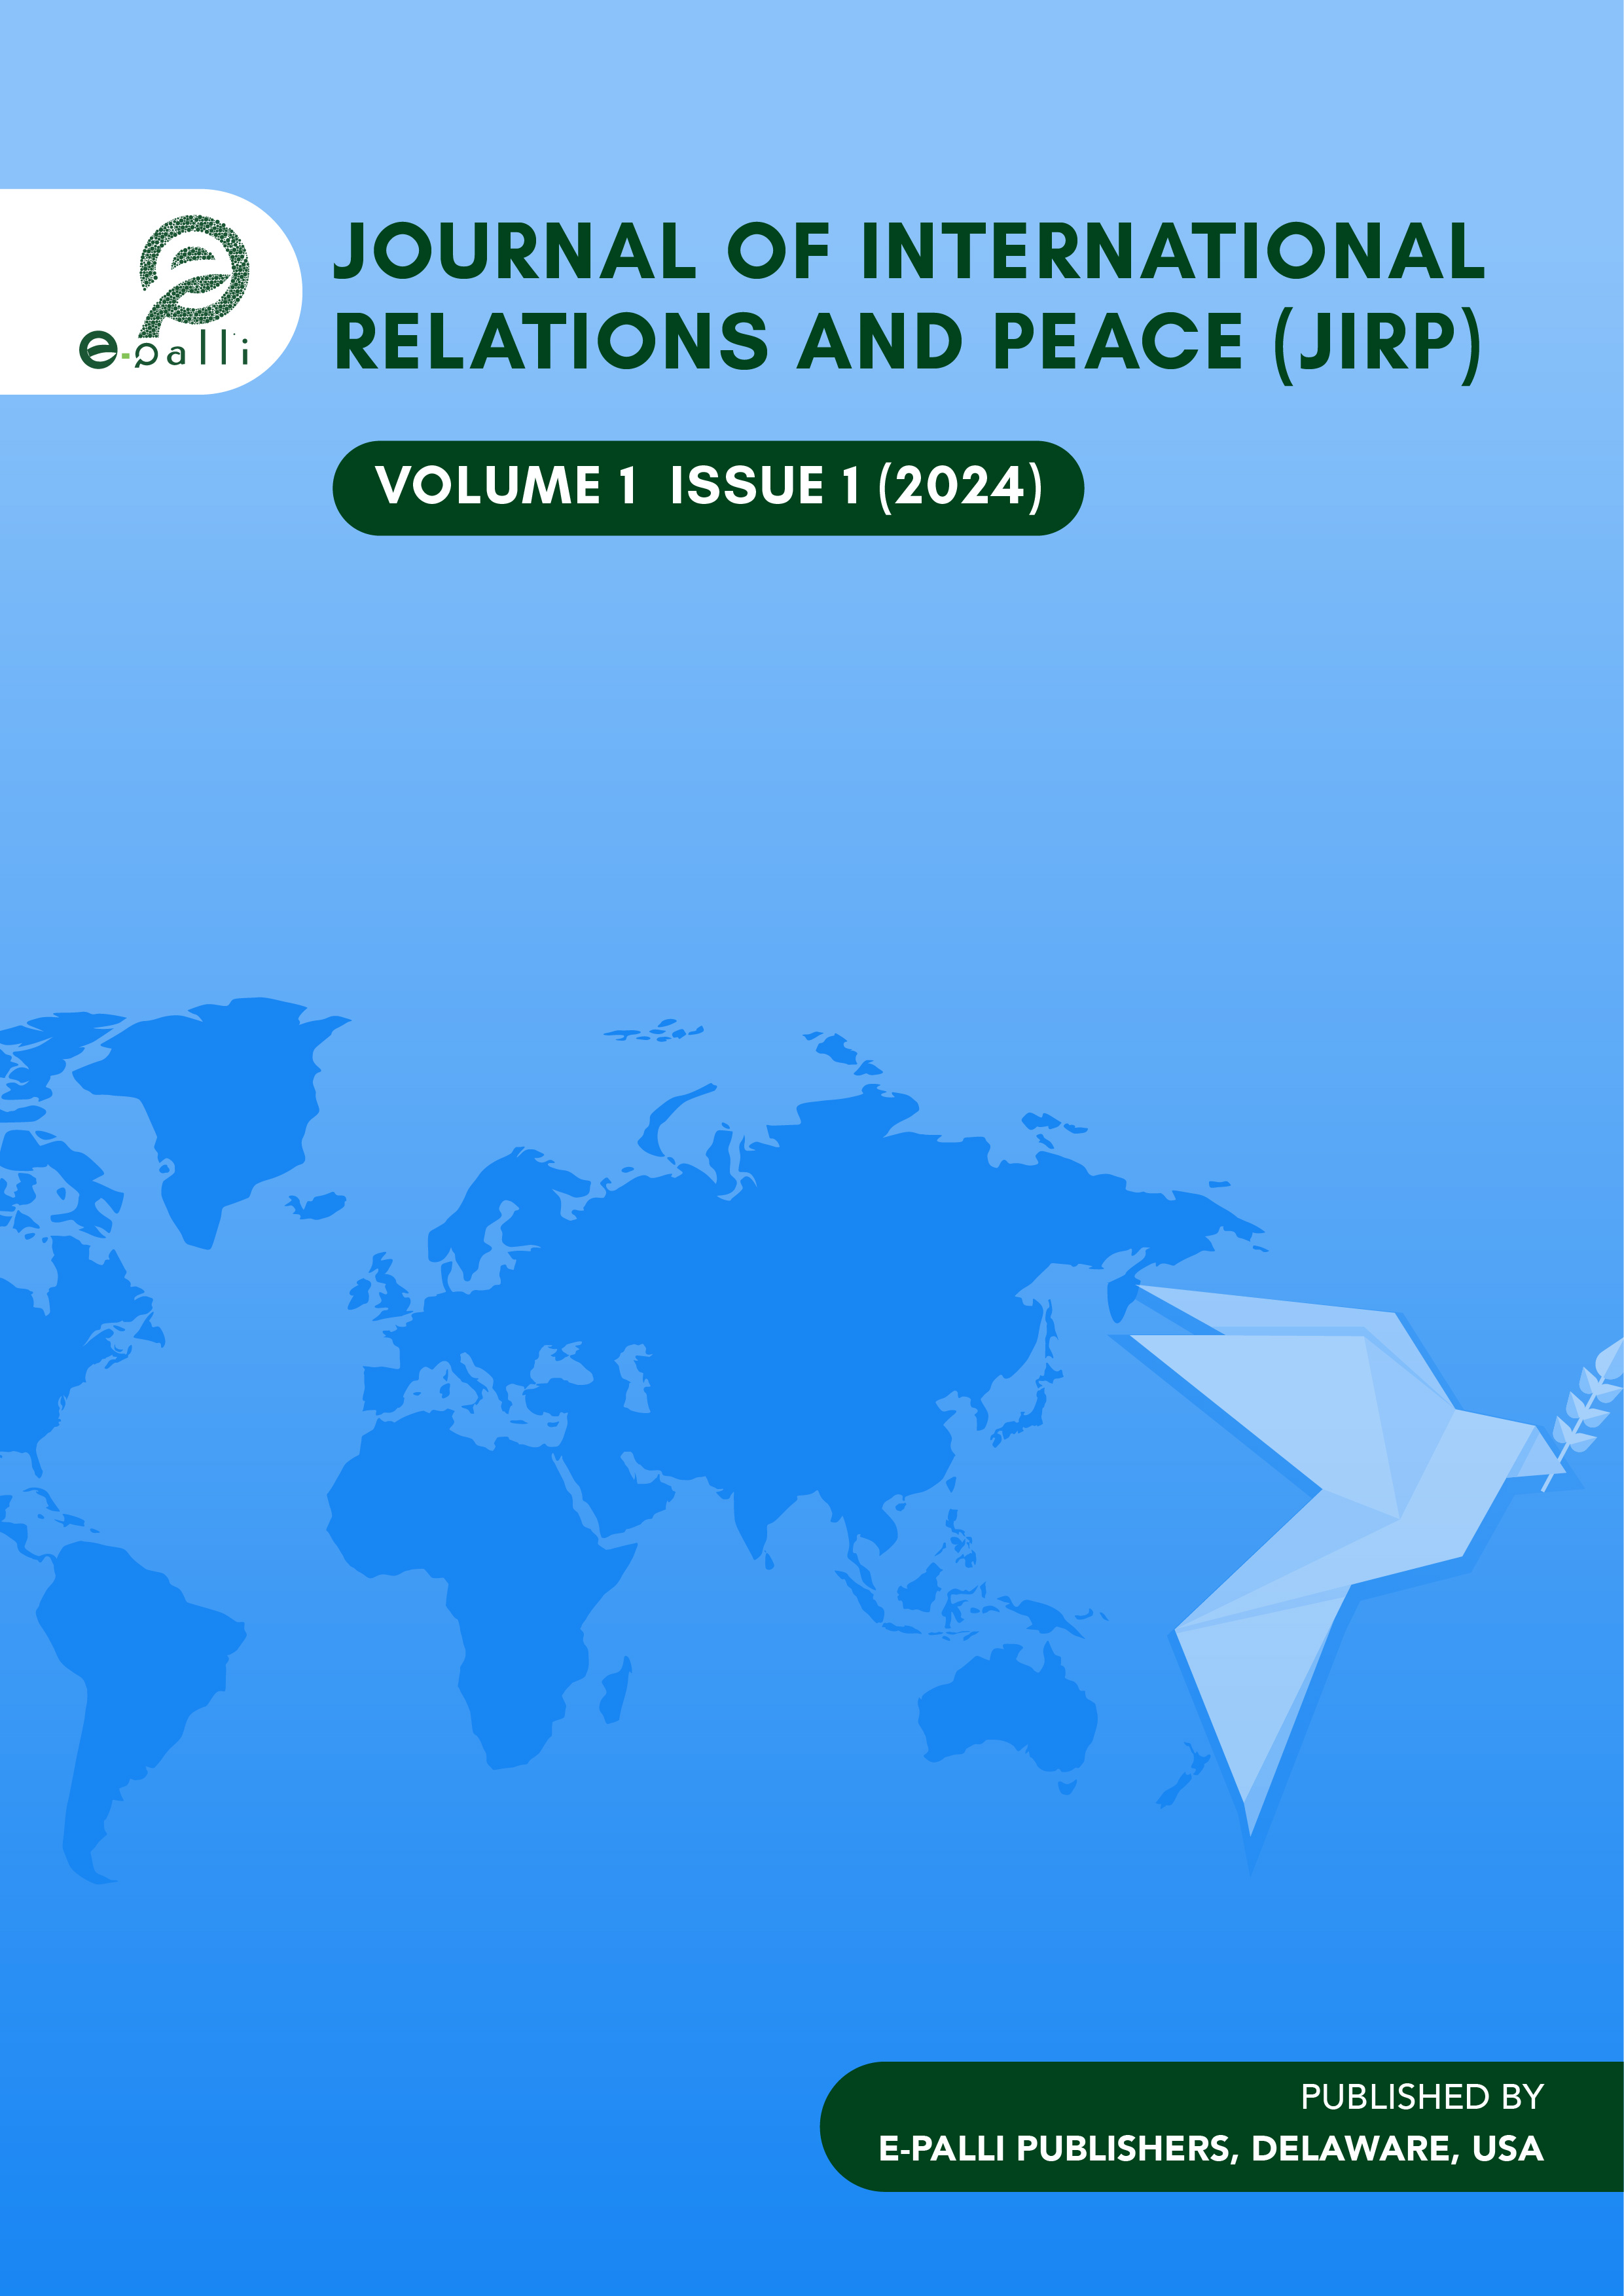 					View Vol. 1 No. 1 (2023): Journal of International Relations and Peace
				